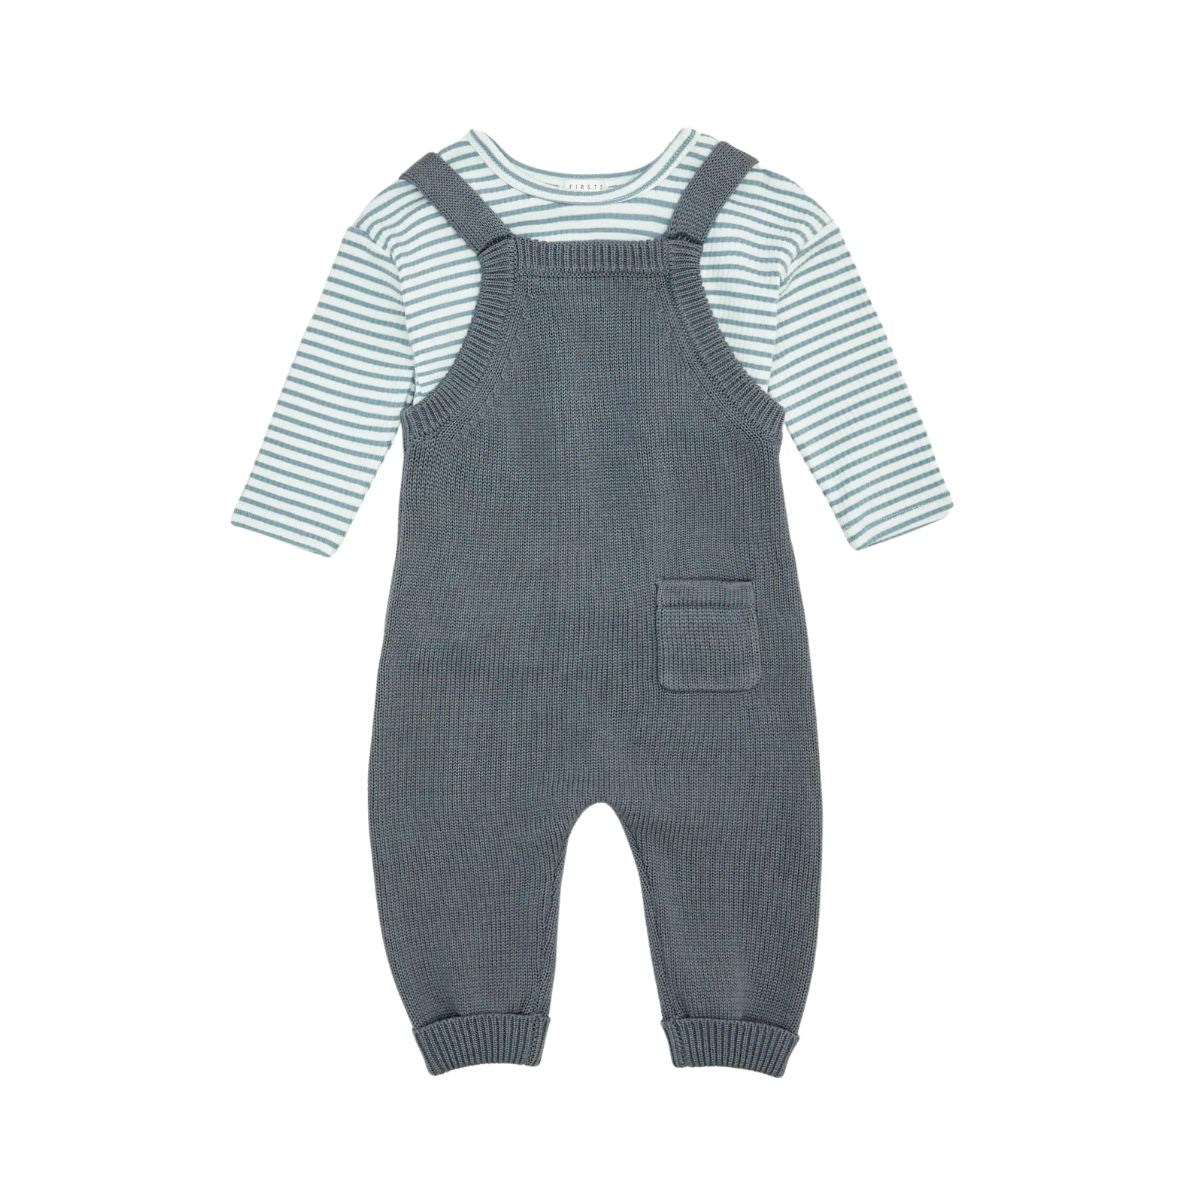 Cadet Grey Sweater Knit Overall Set